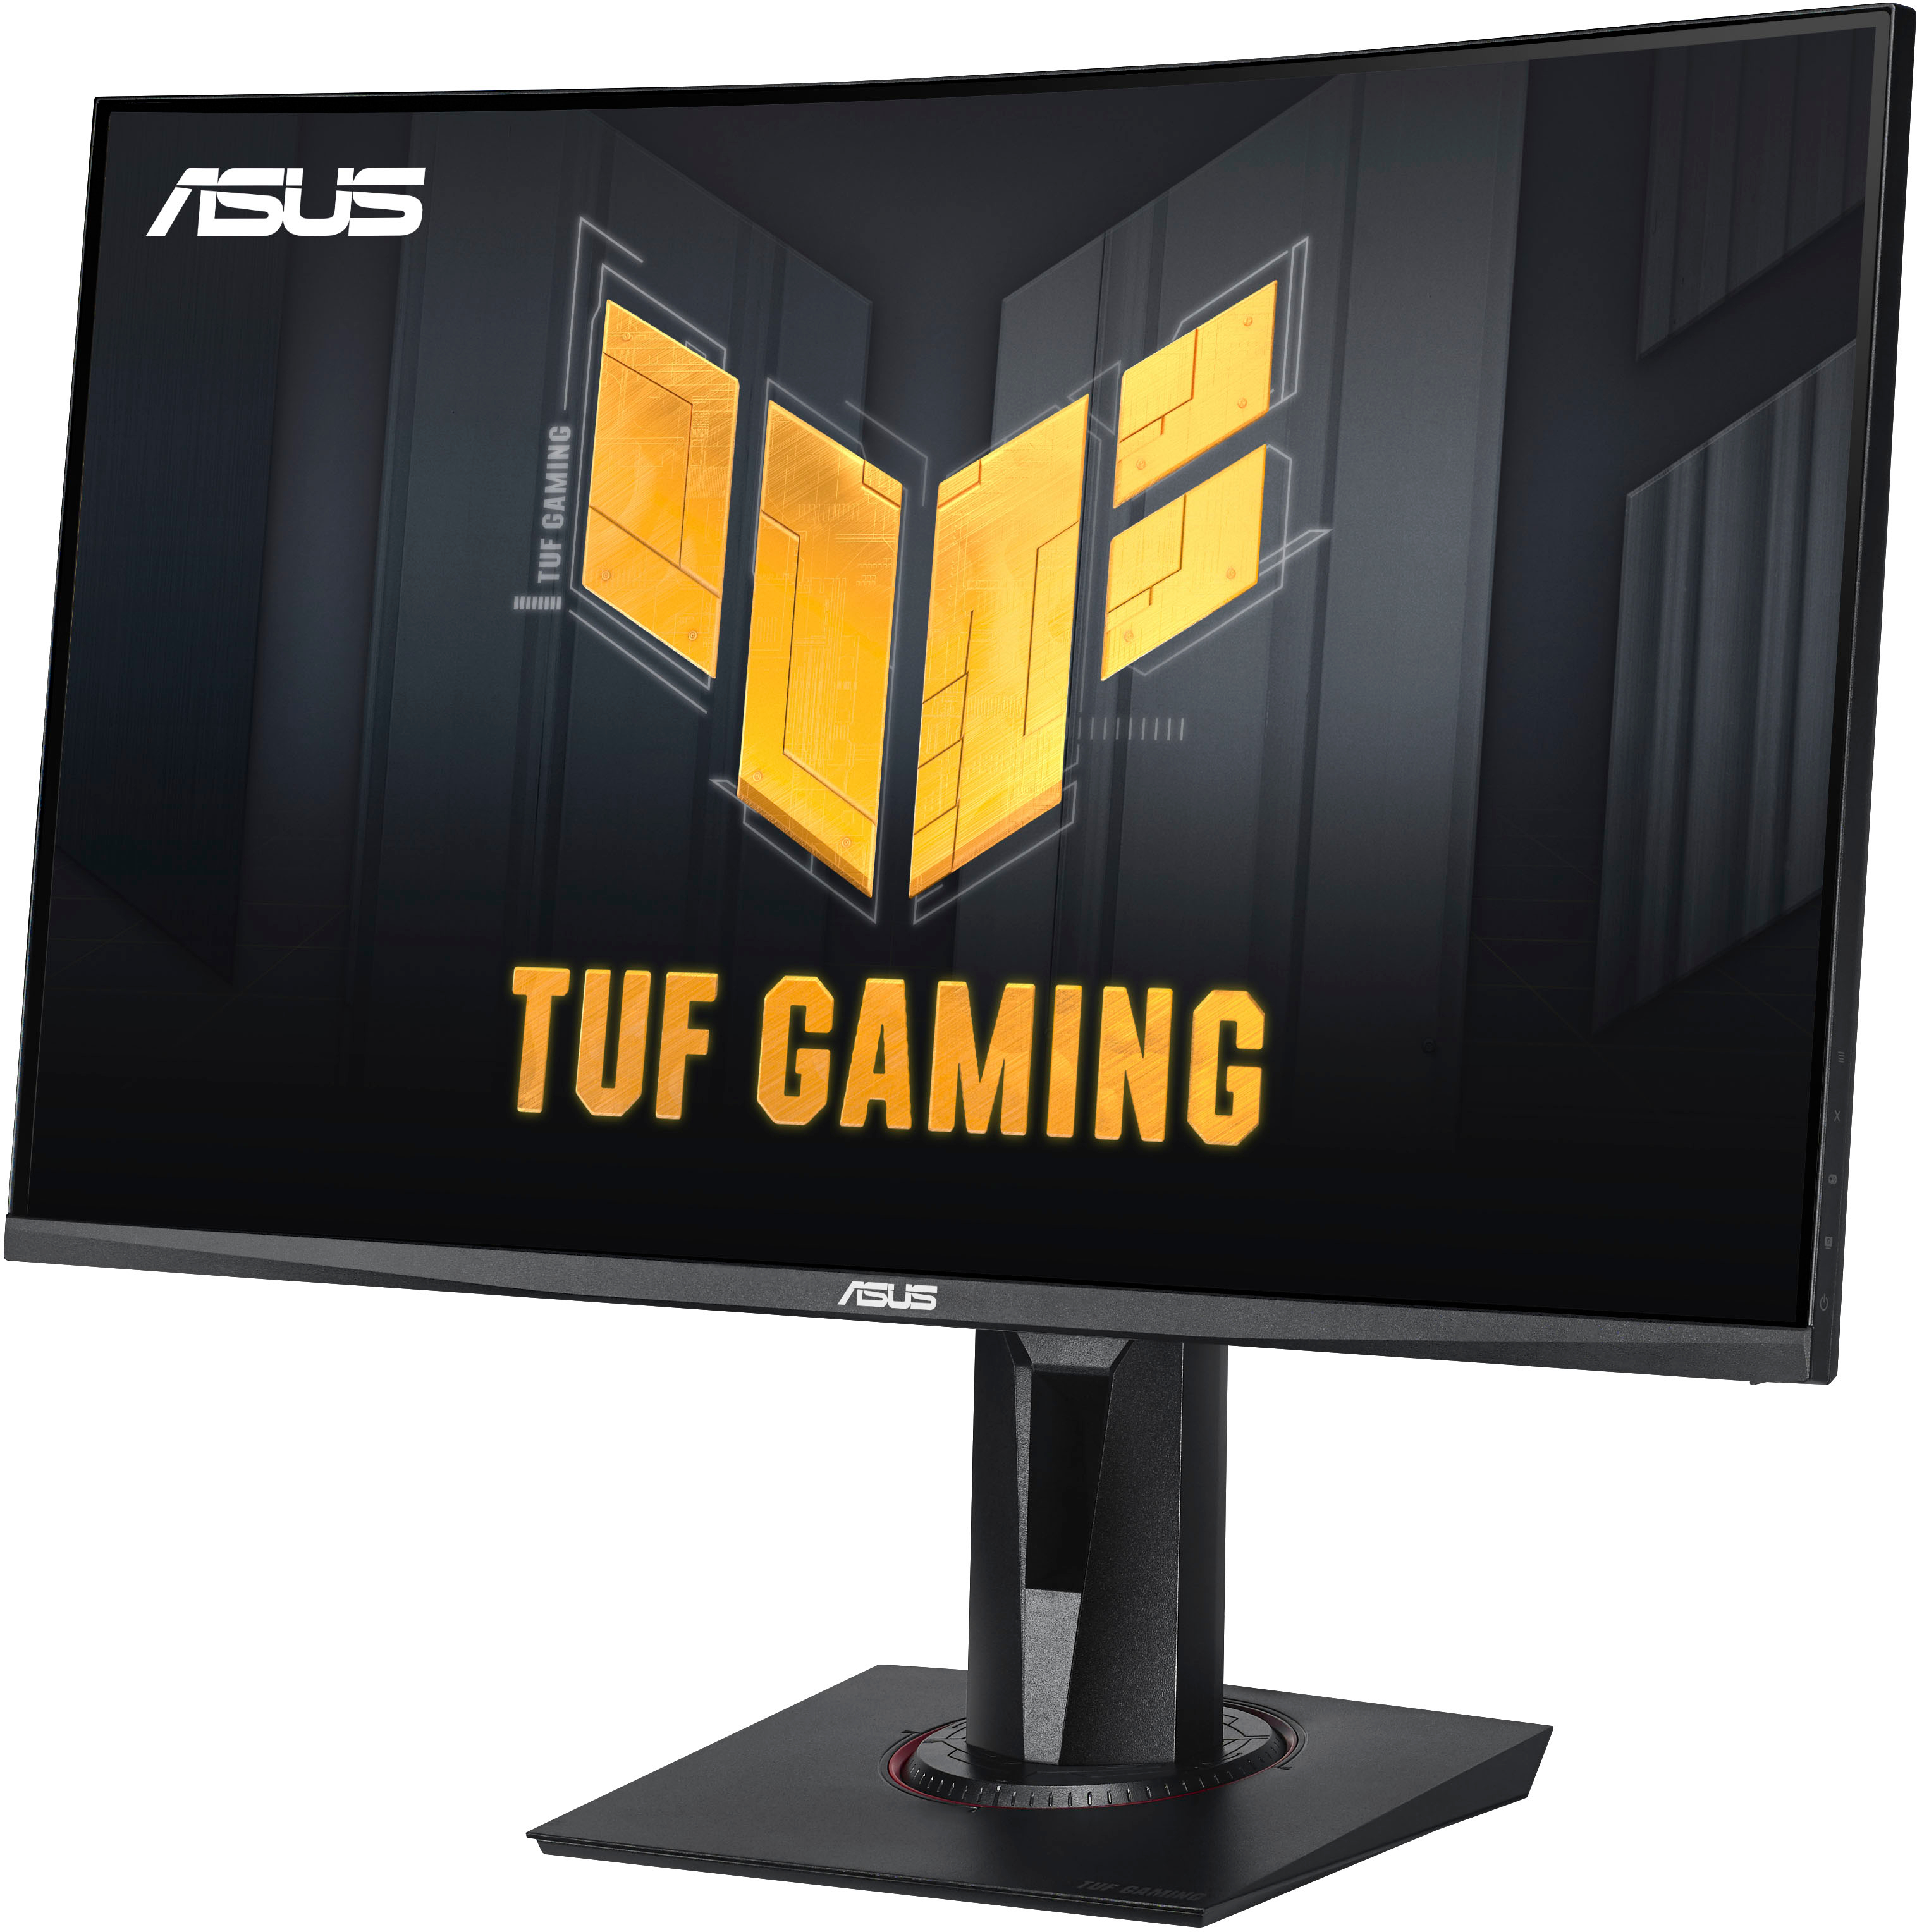 Left View: ASUS - TUF Gaming 27" Curved FHD 240Hz 1ms FreeSync Premium Gaming Monitor w/ HDR and Height Adjust (DisplayPort, HDMI) - Black